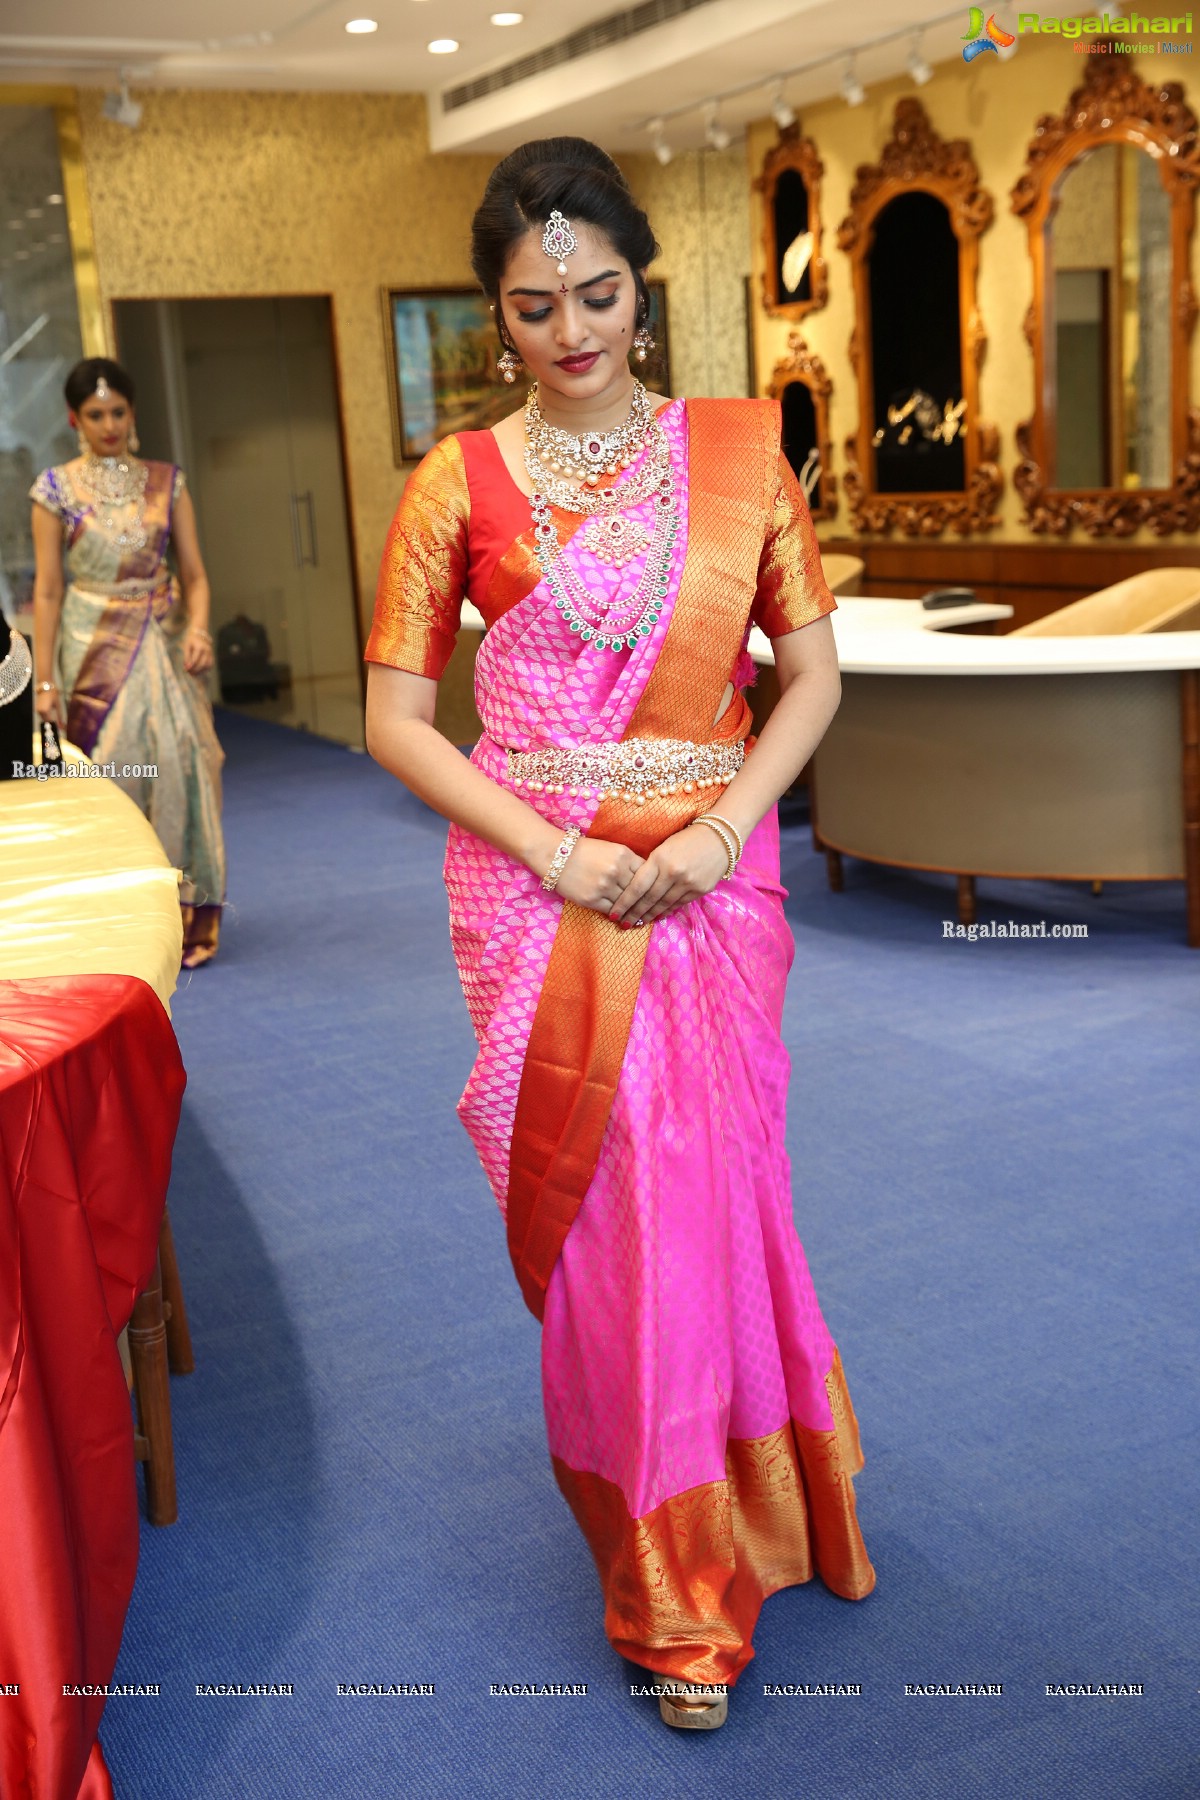 The Diamond Store by Chandubhai Launches Its New 'Bridal Collection’